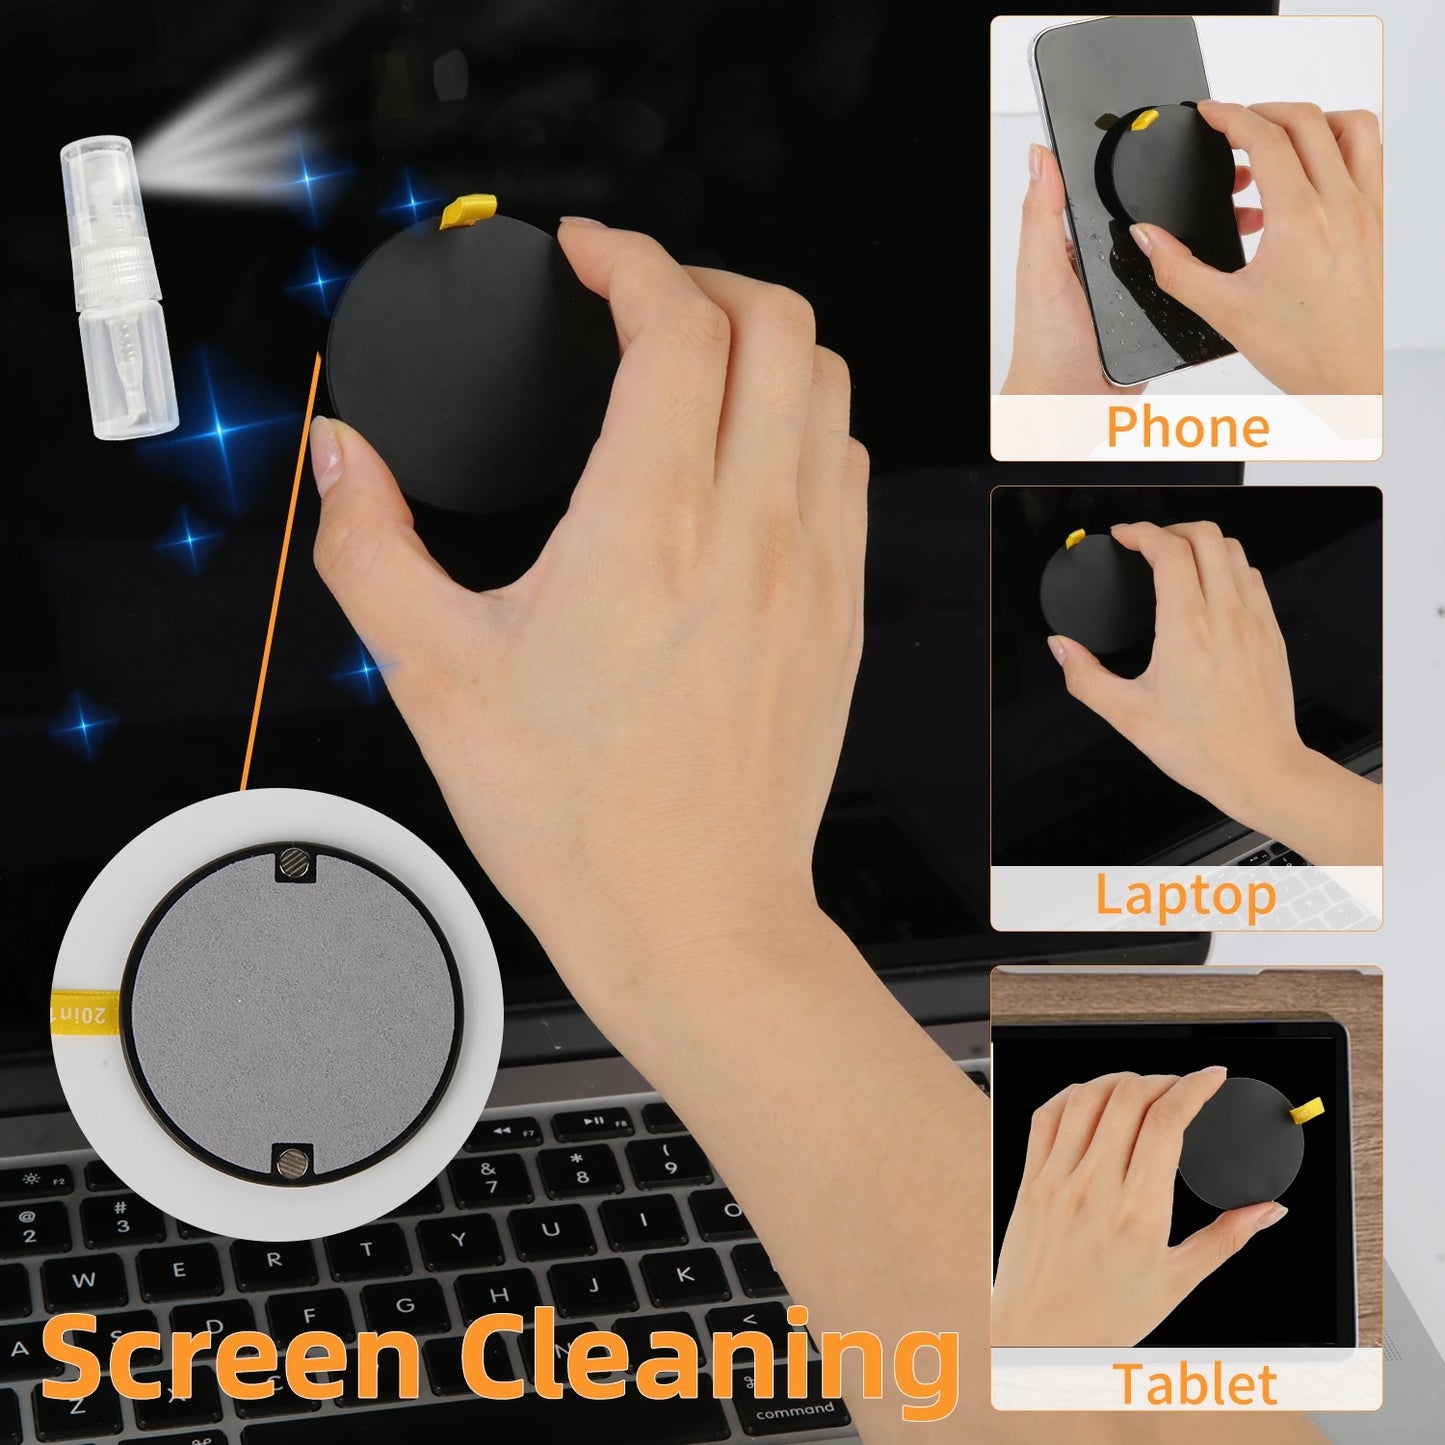 Multipurpose 20-in-1 Cleaning Tool Set for Digital Devices